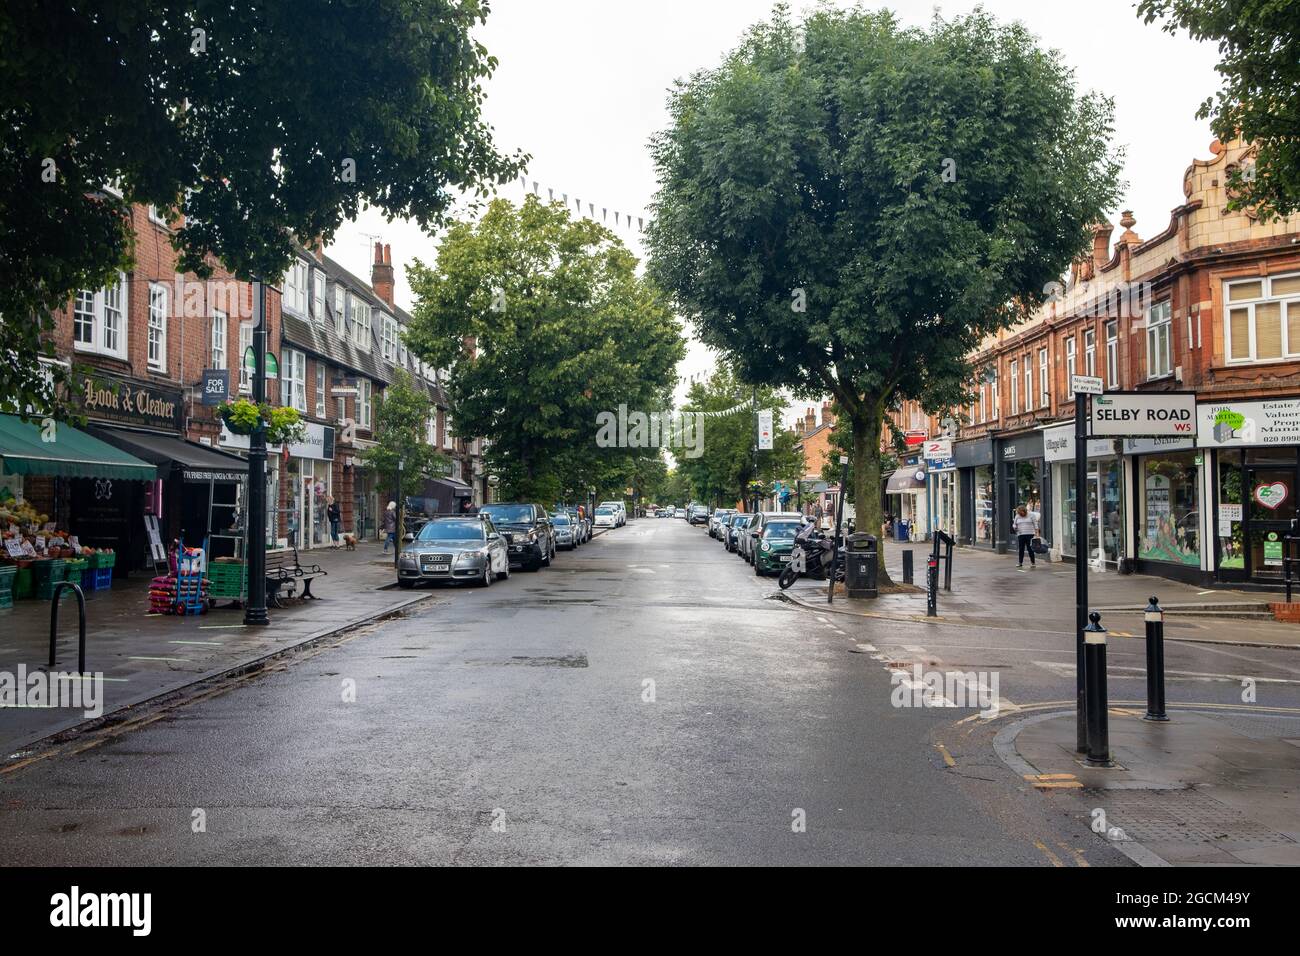 London August 2021: Pitshanger Lane shops, a busy high street of independent shops in Ealing, West London Stock Photo